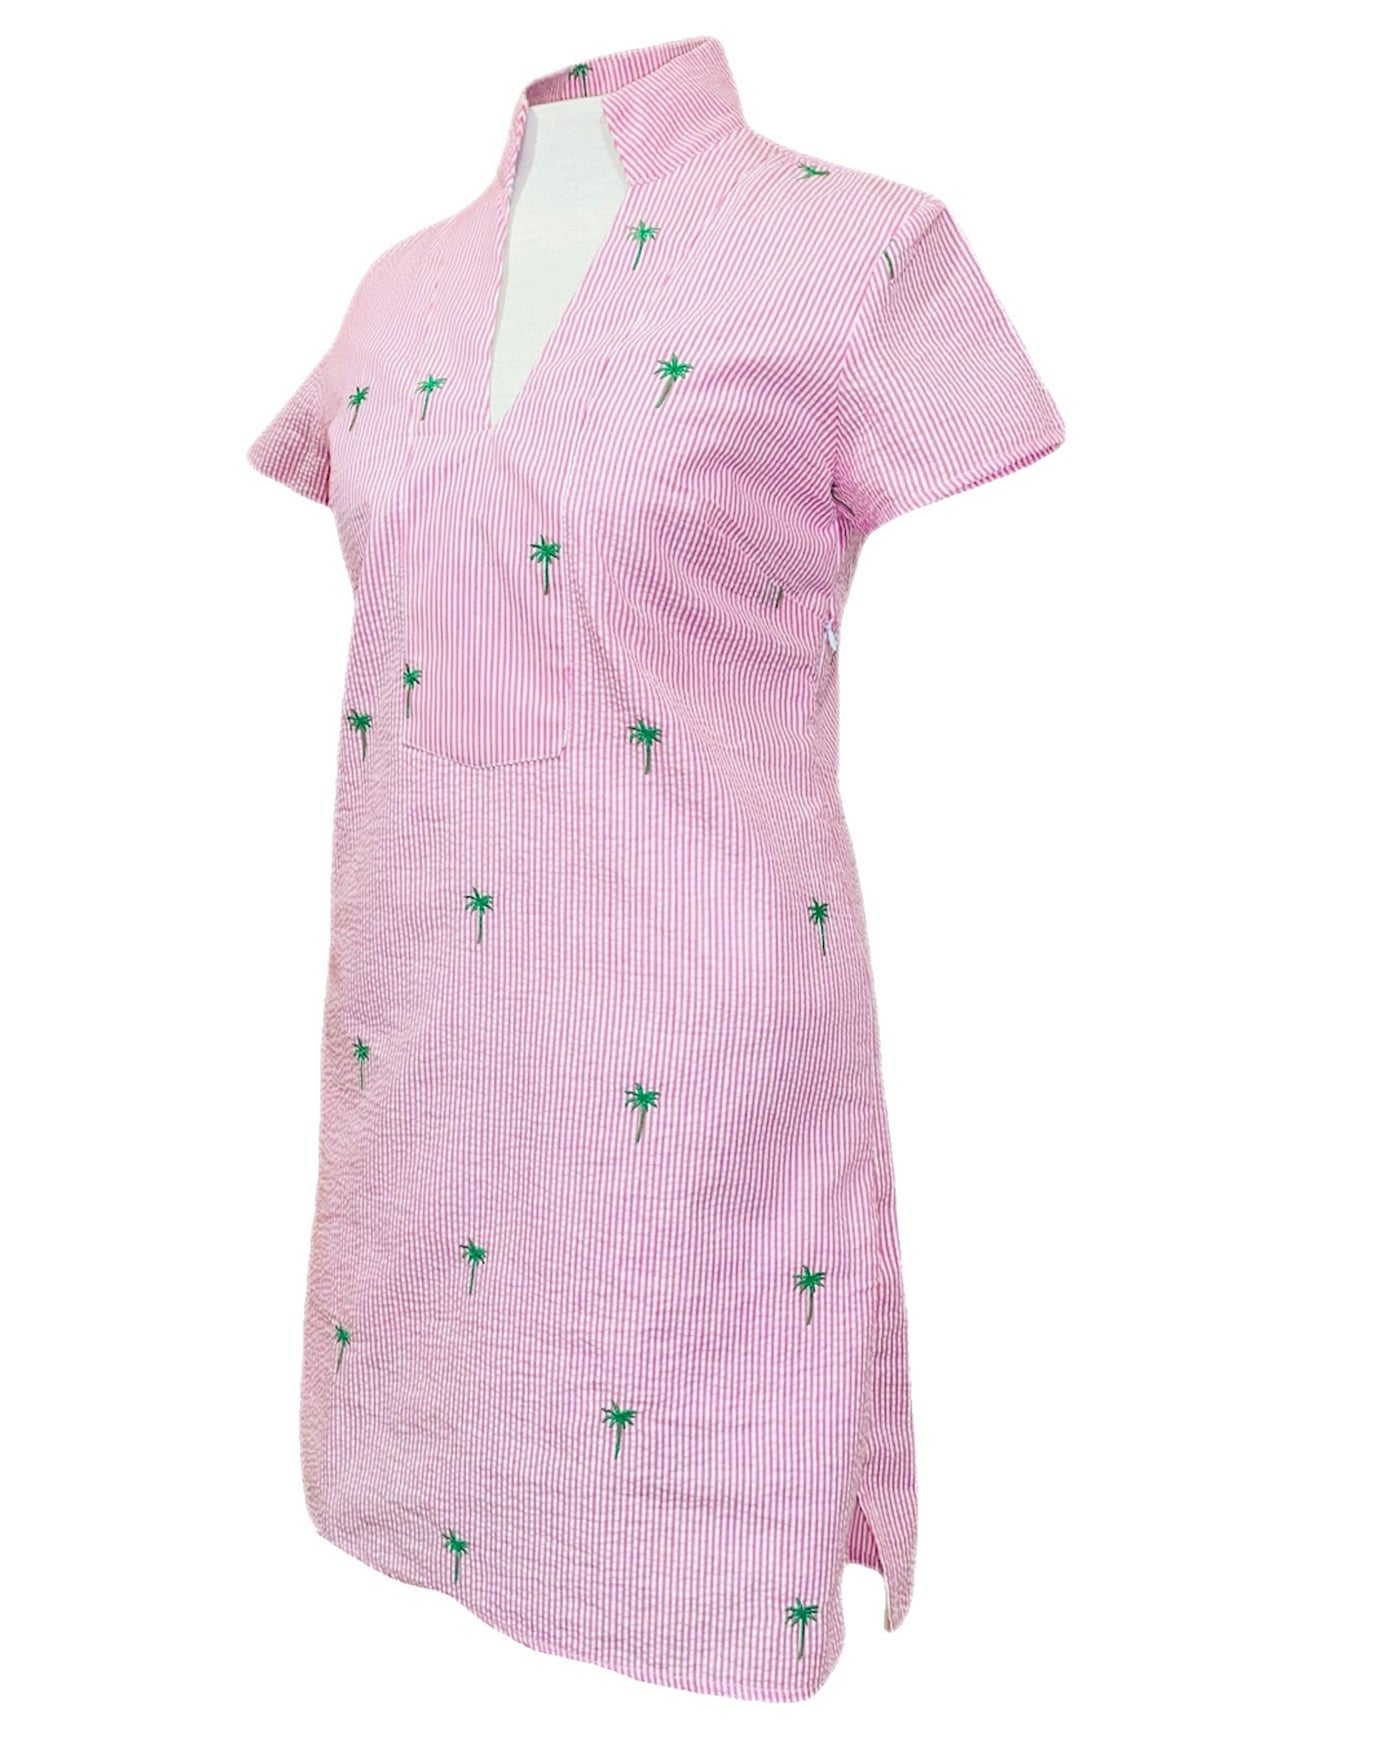 Pink Seersucker with Green Palm Trees Tunic Dress